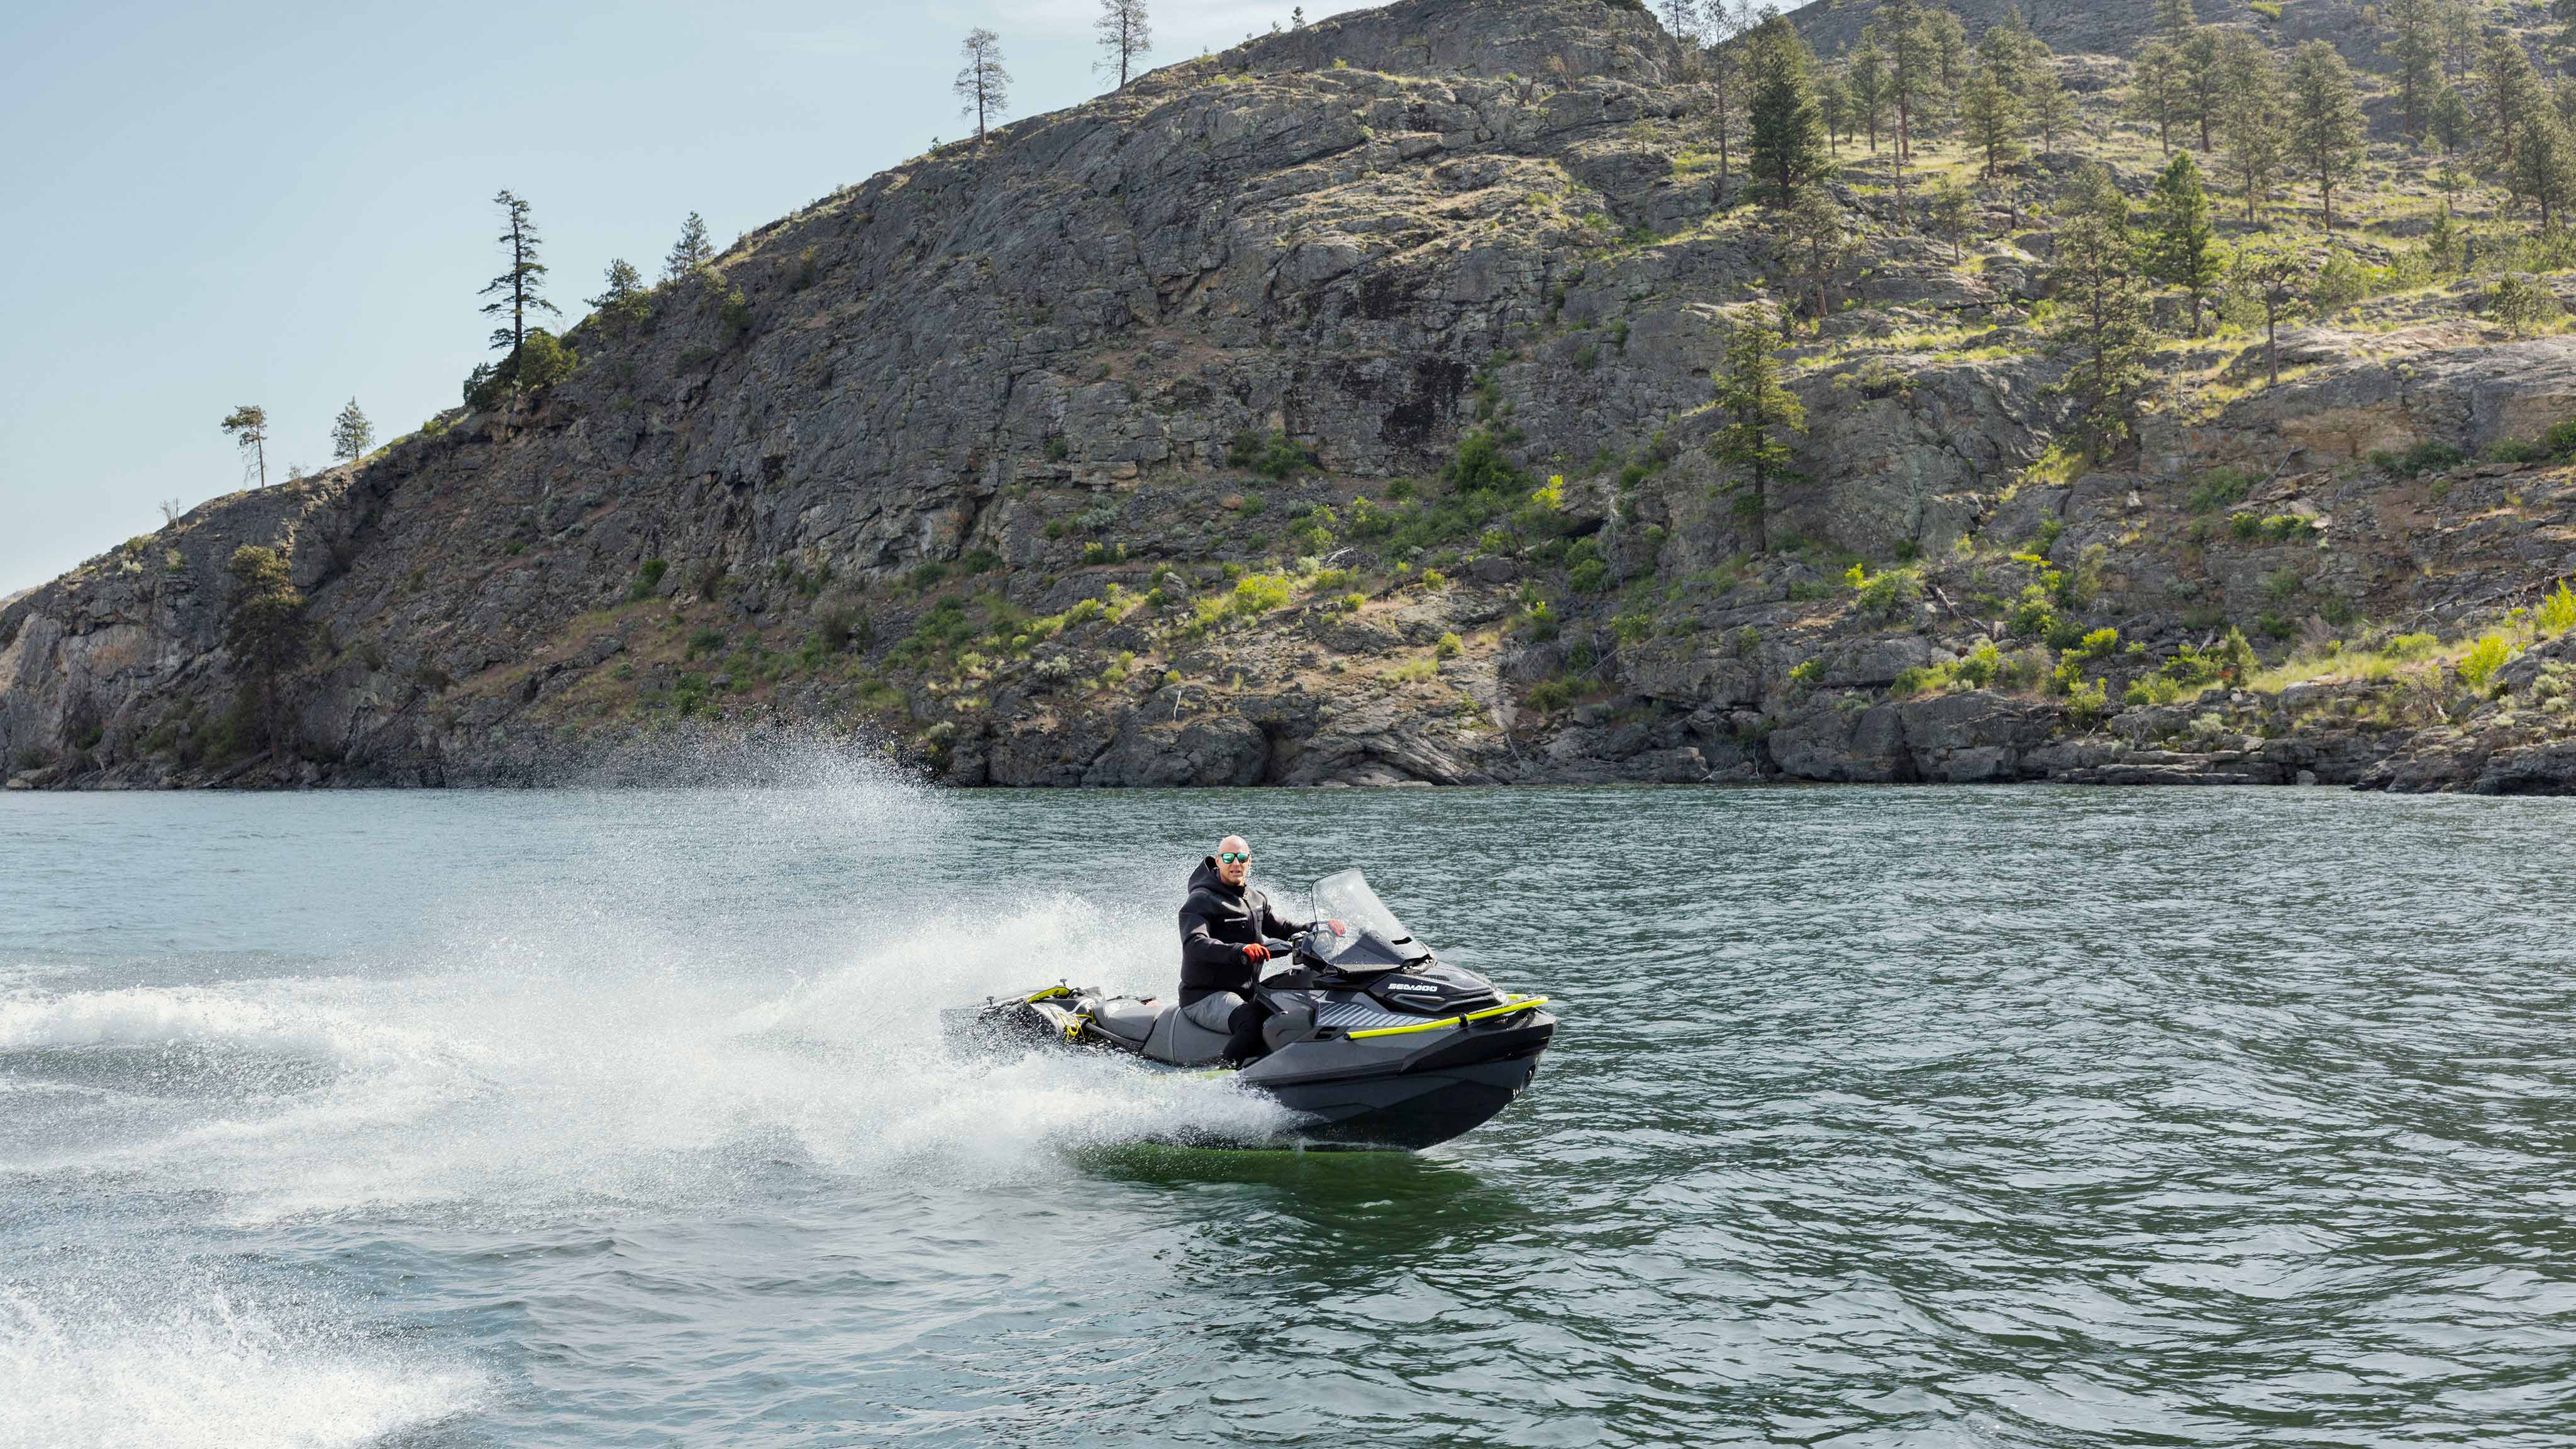 Homme riding the Sea-Doo Explorer Pro 170 with the Touring Windhsield